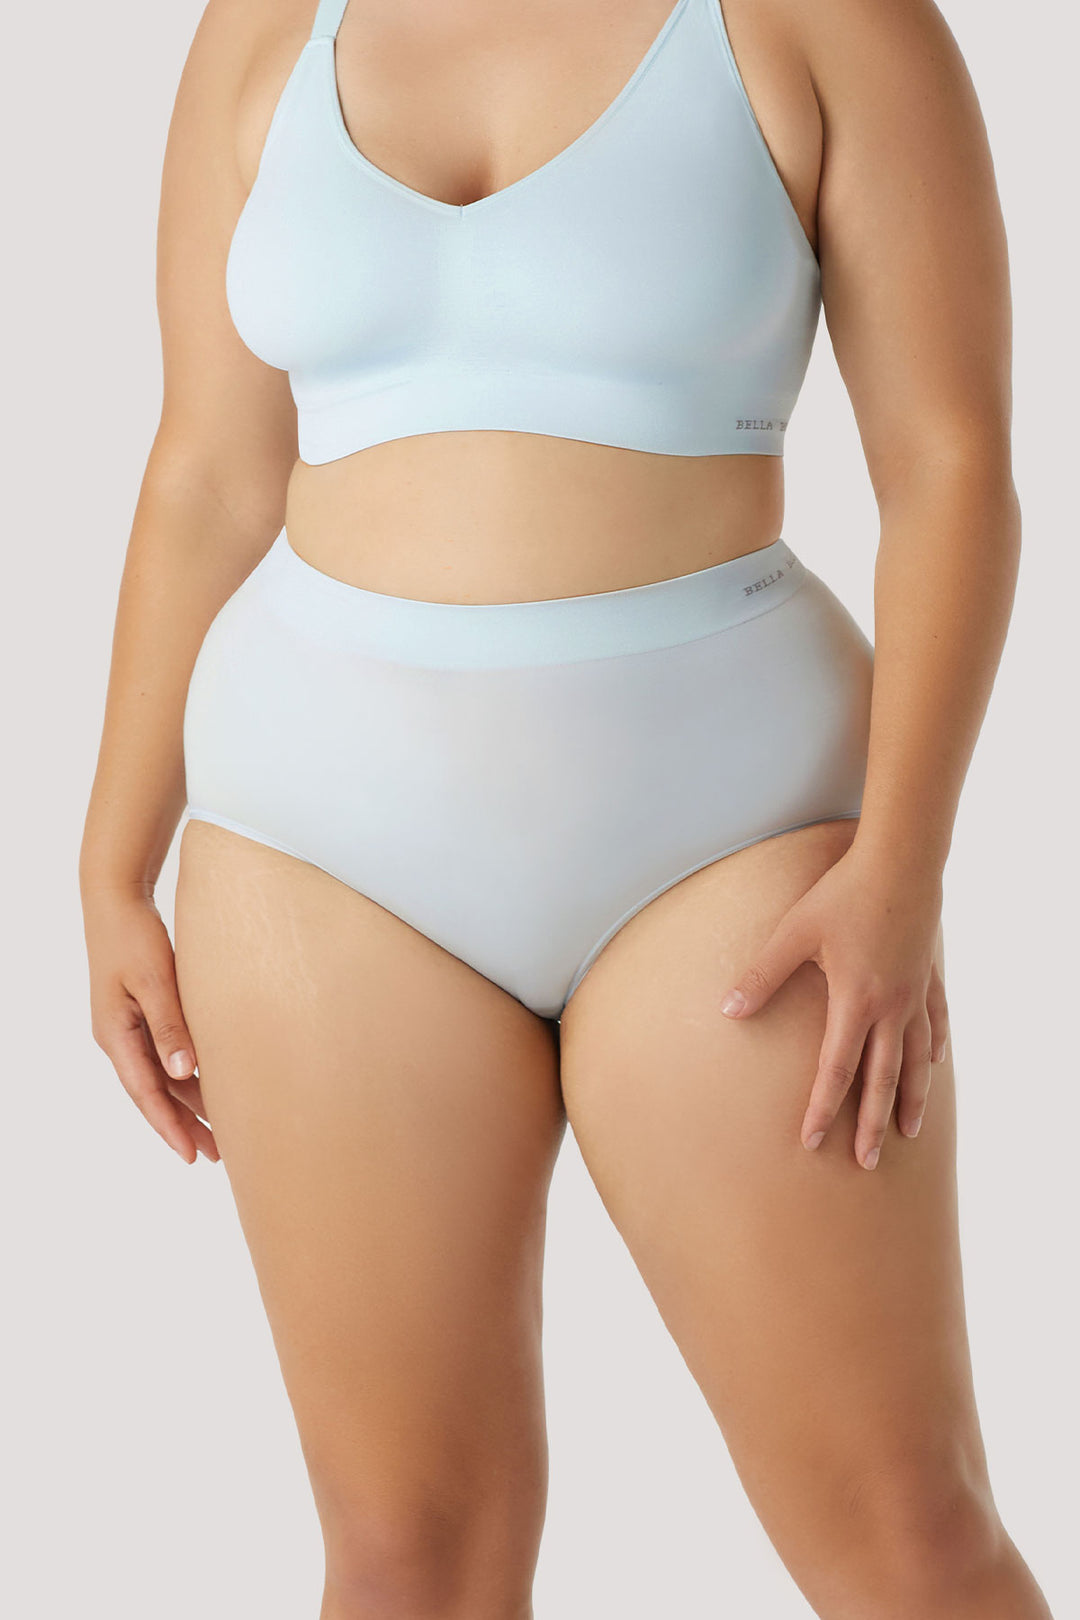 Travel Knickers, Full Cover Women's Knickers